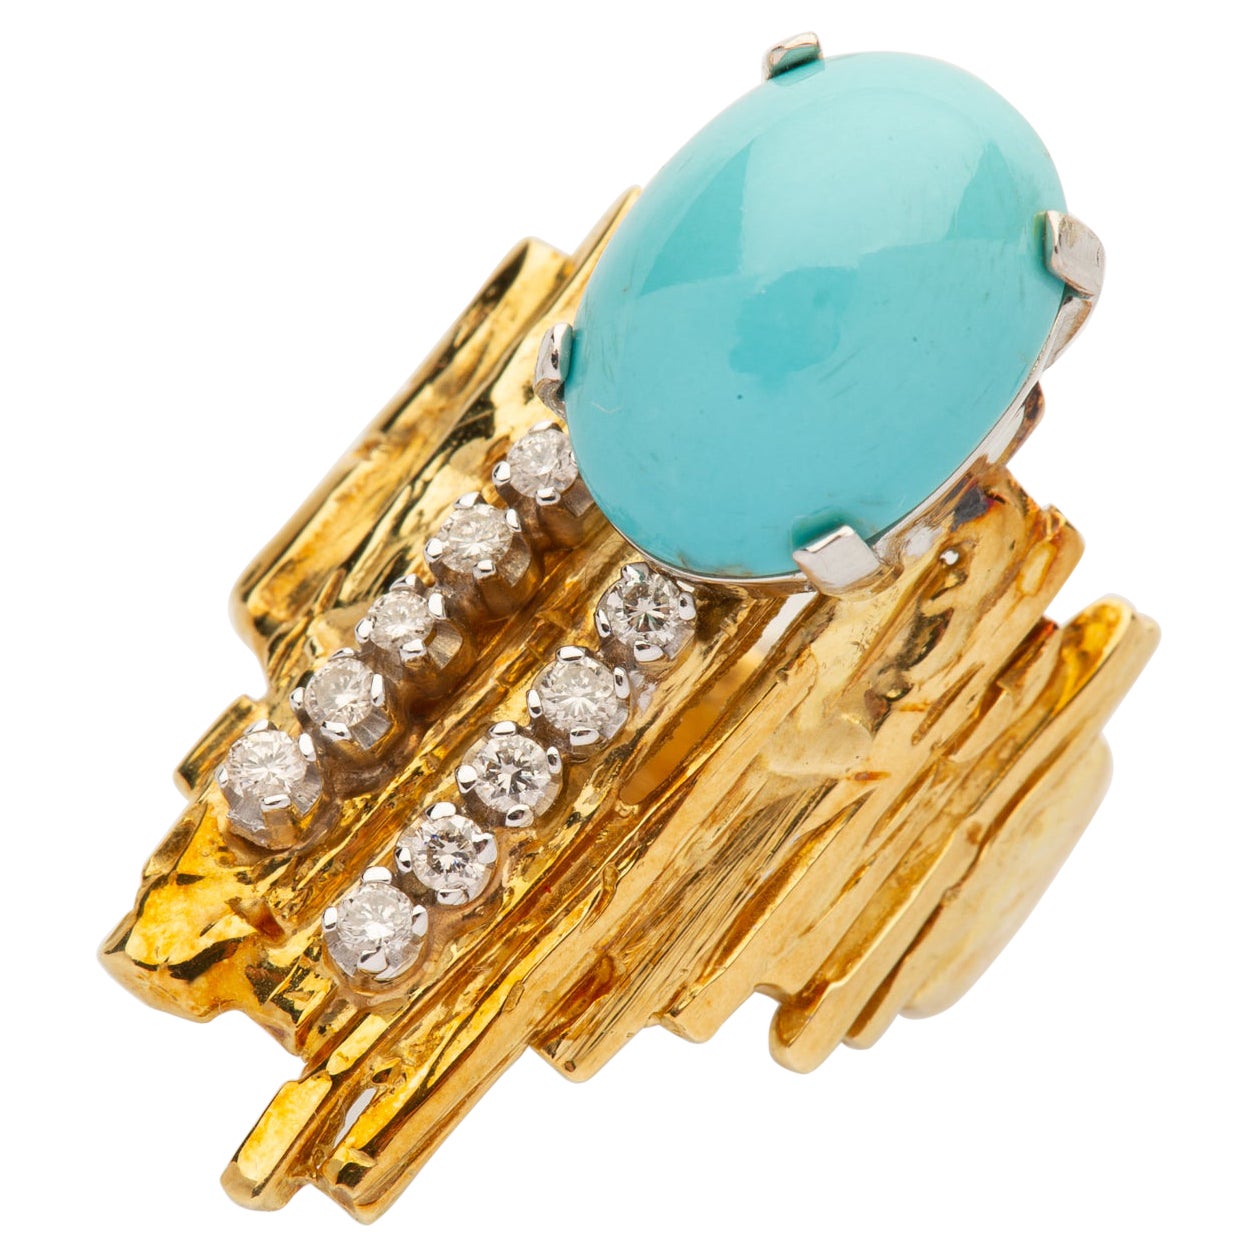 Cocktail Ring in Turquoise Cabochon and Diamonds